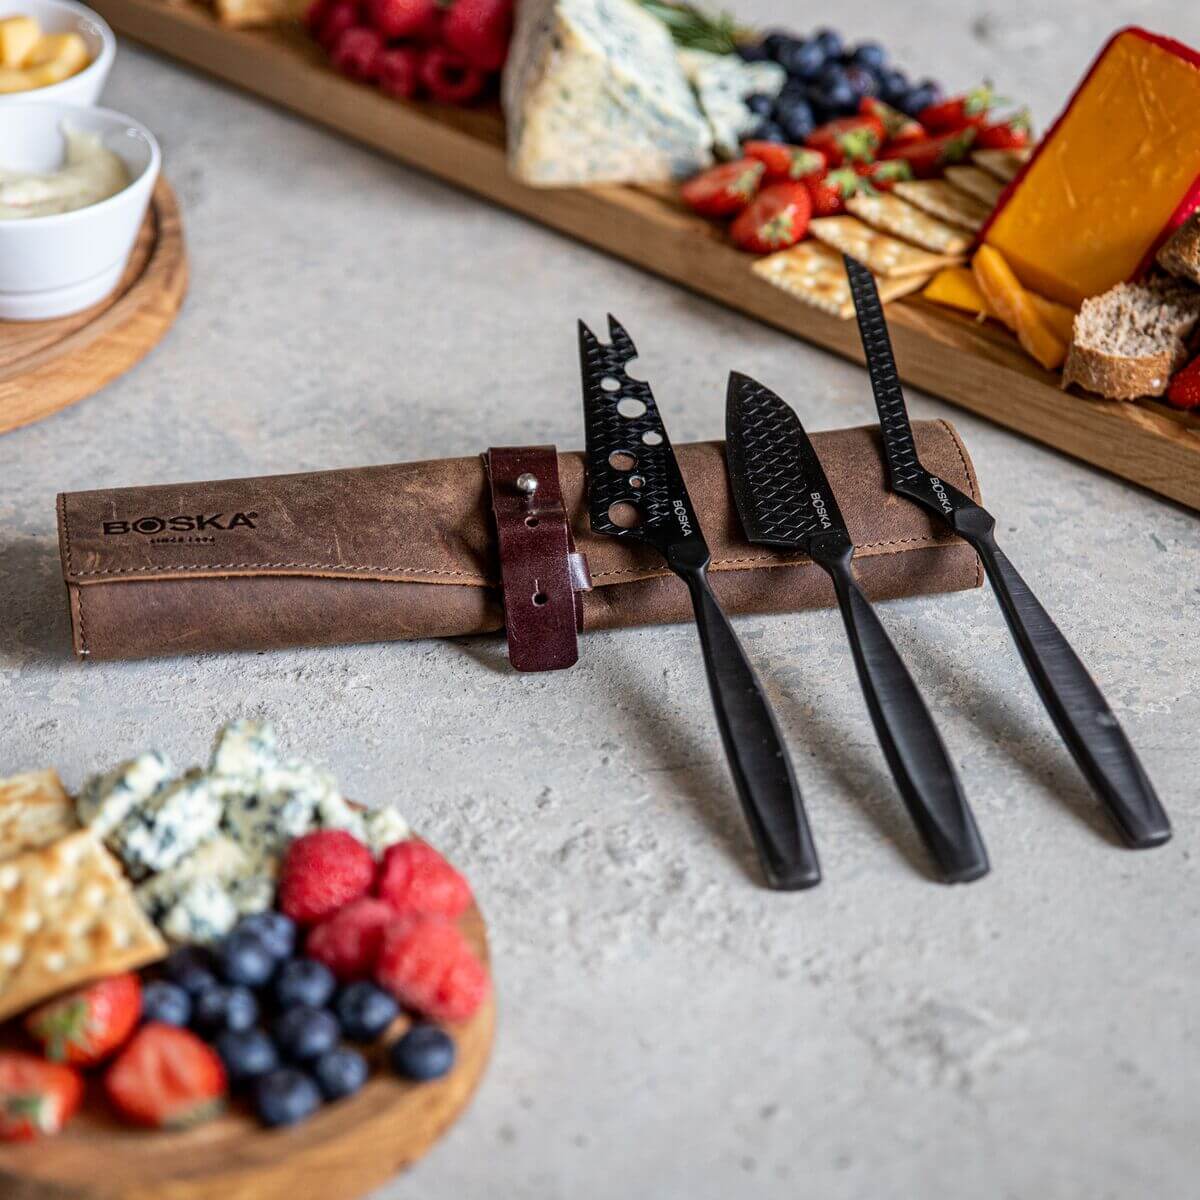 Cheese Knife Set Monaco+ Black with Leather Case, BOSKA Food Tools